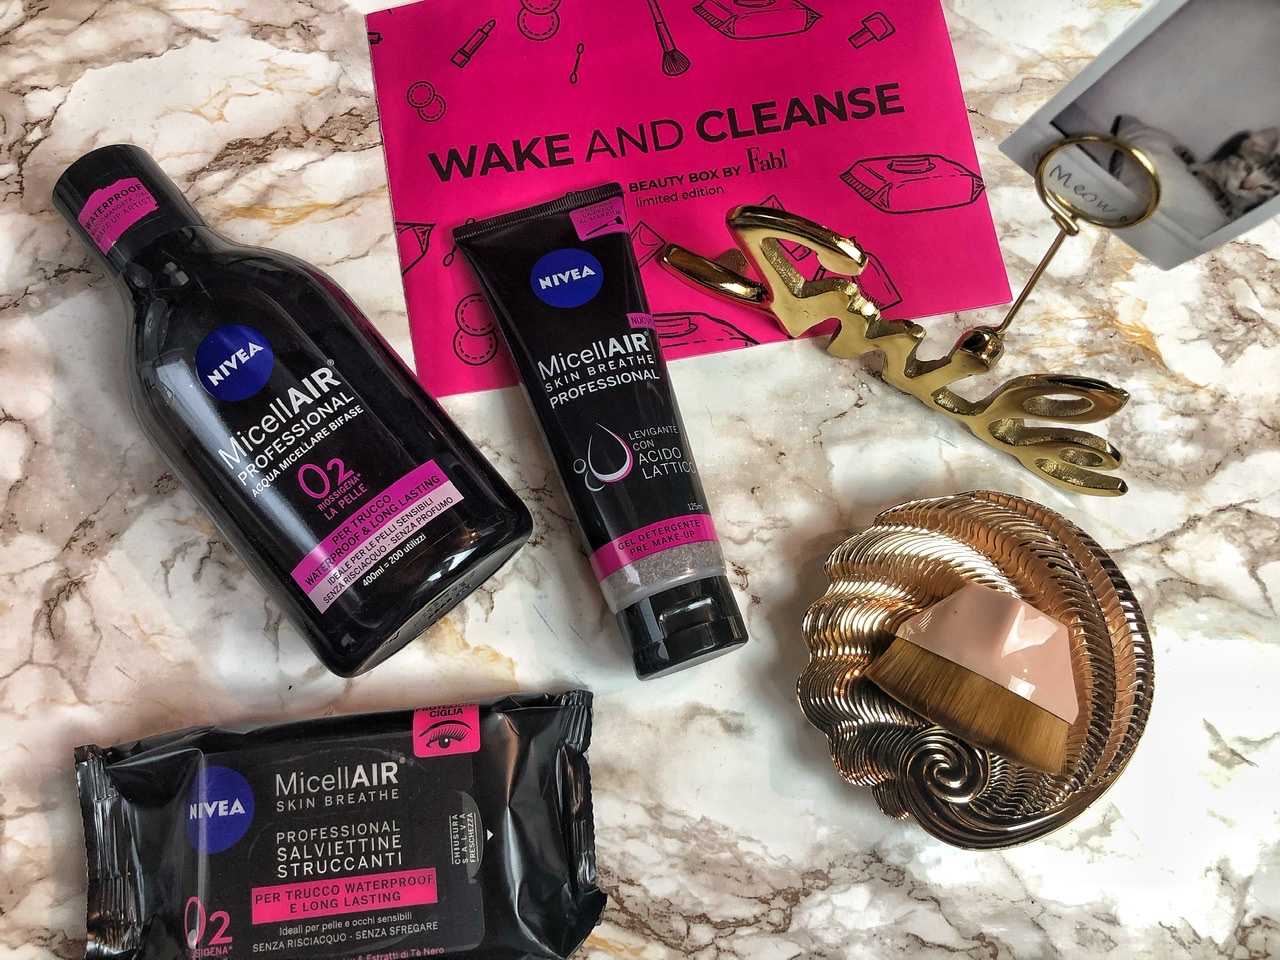 Wake and Cleanse: Special My Beauty Box By Fab